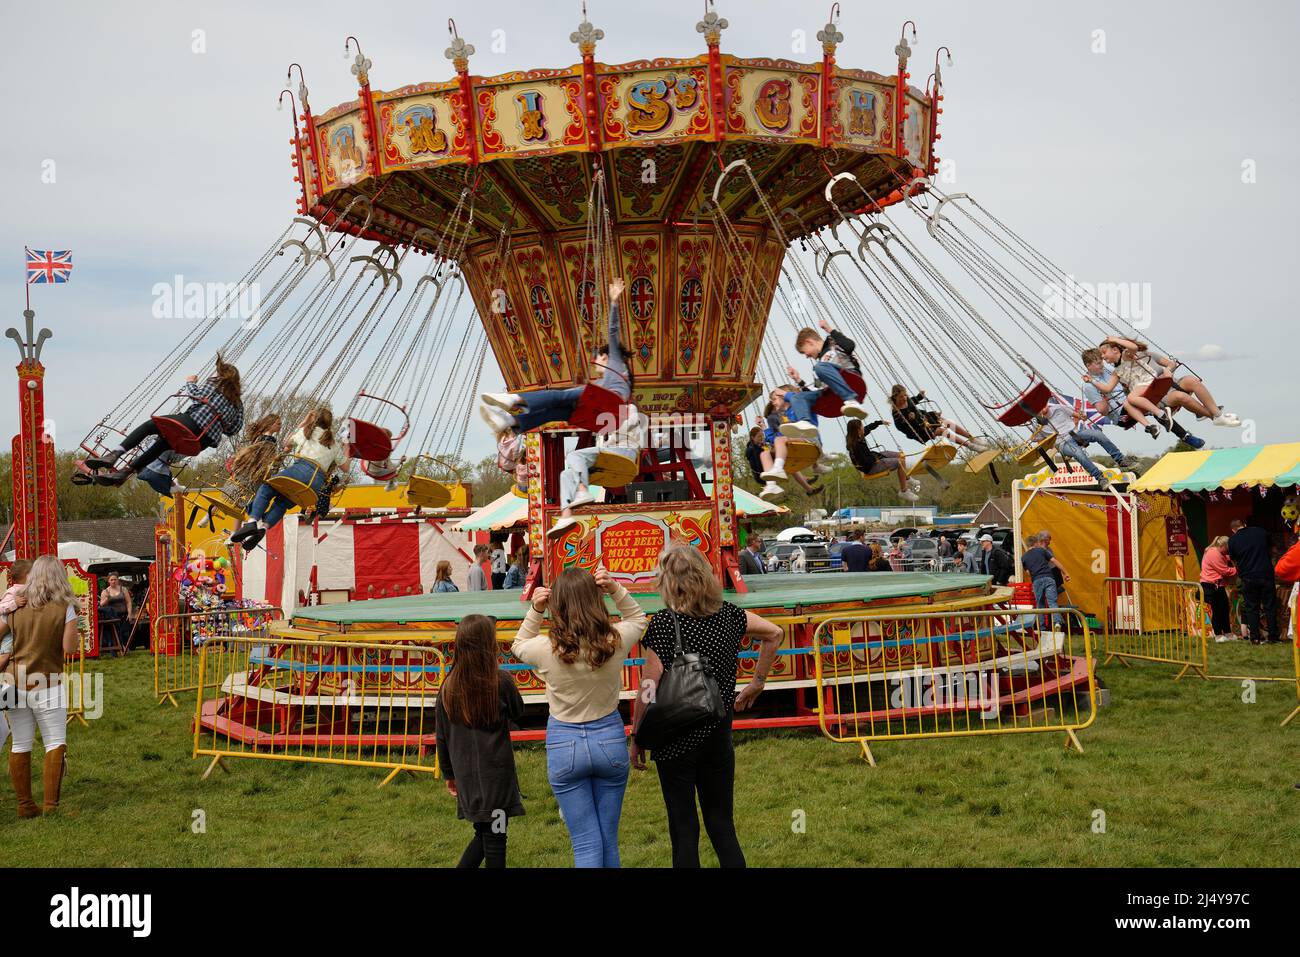 A Swinging Chair  'merry go round'  carousel at a fairground in England. Stock Photo